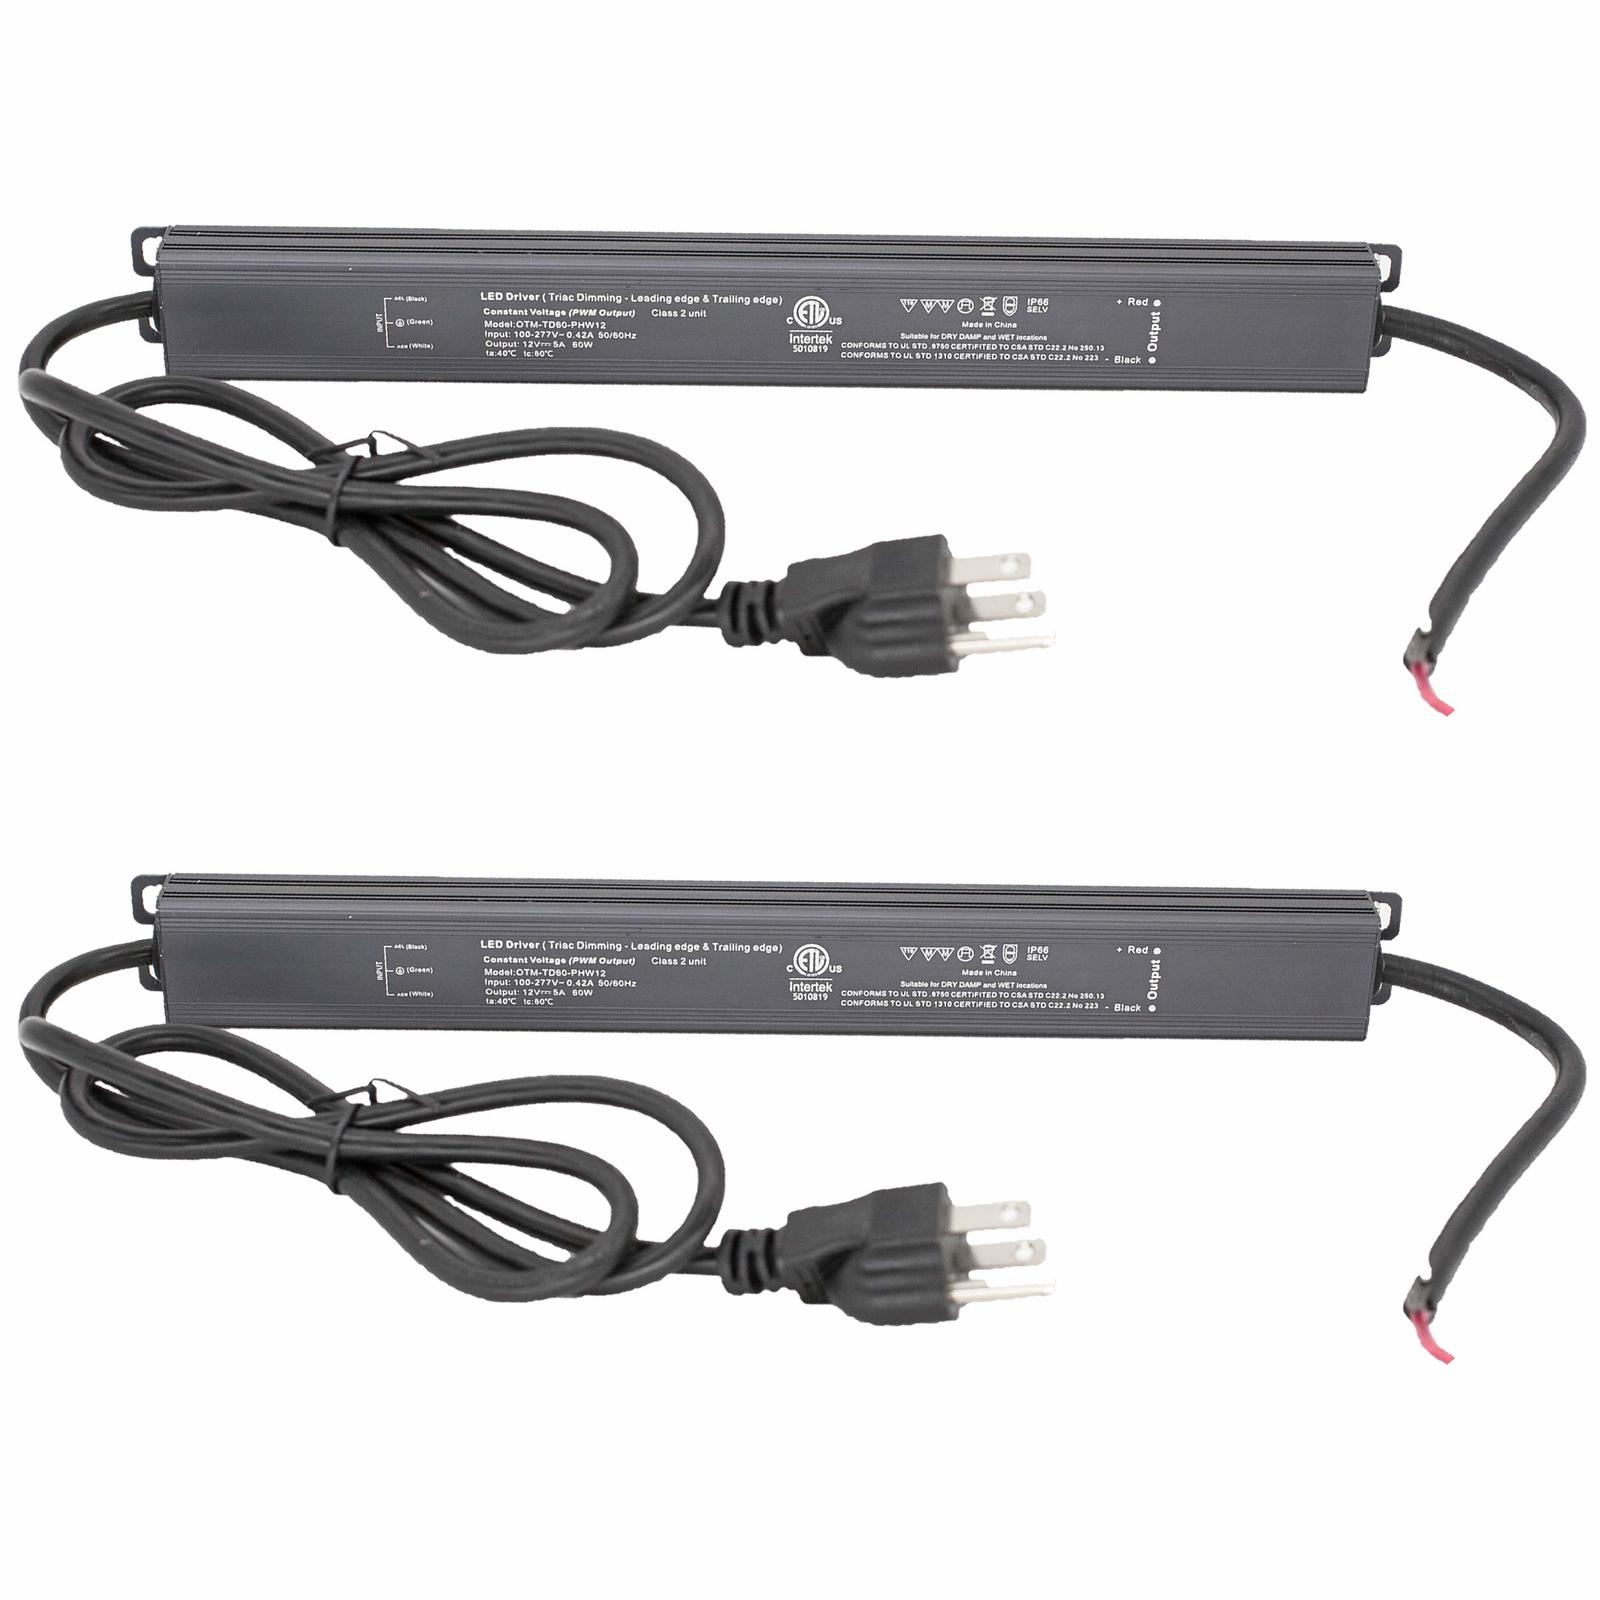 Primary image for 60W LED Dimmable Driver, 2 Pack 110v AC to 12v DC Transformer Triac Linear Style